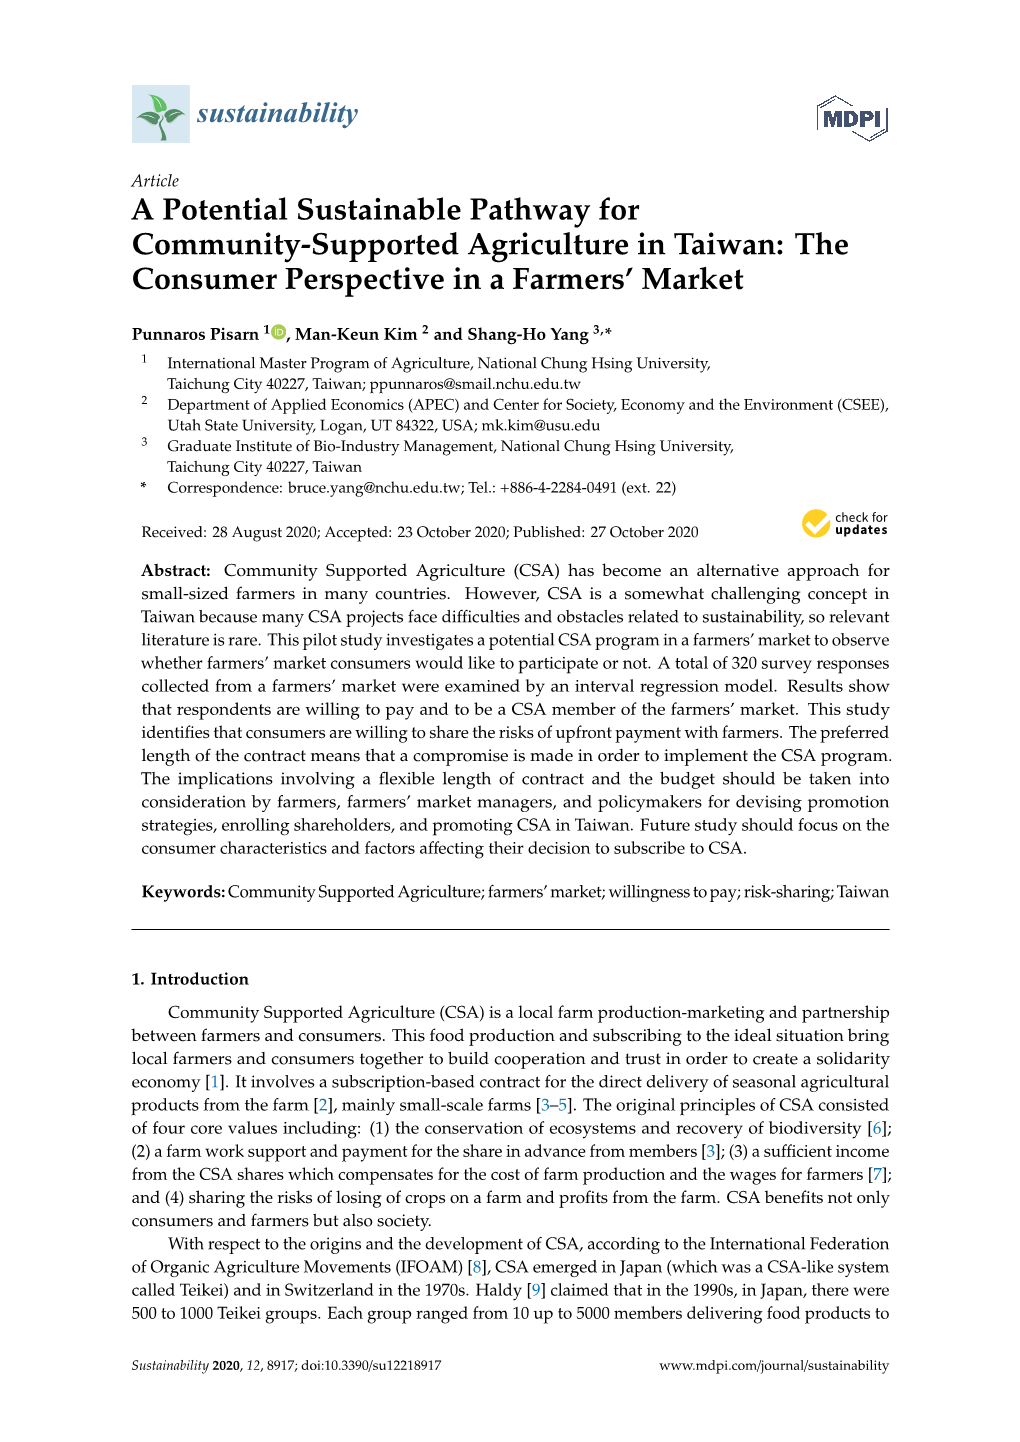 A Potential Sustainable Pathway for Community-Supported Agriculture in Taiwan: the Consumer Perspective in a Farmers’ Market